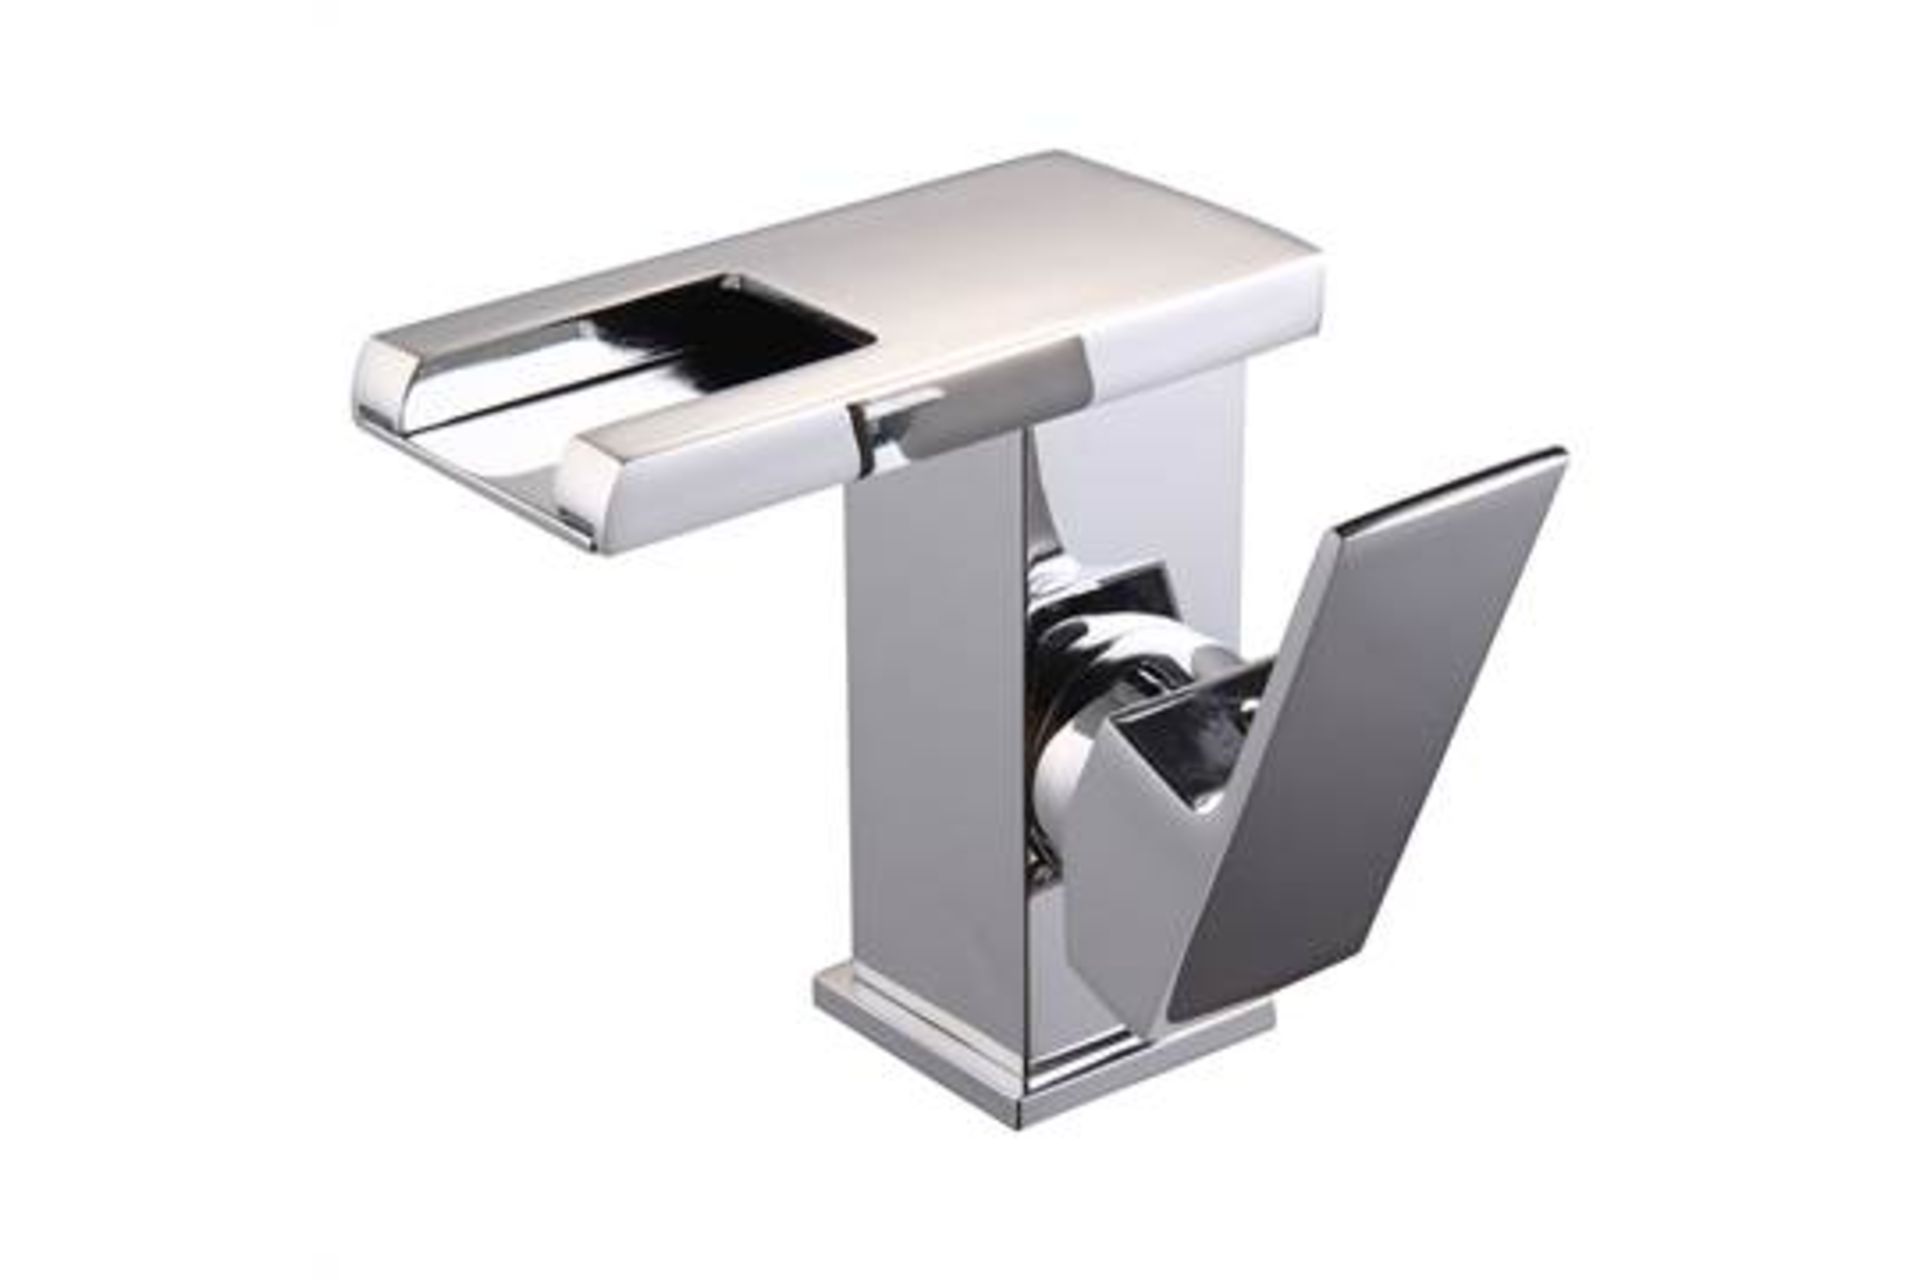 (M162) LED Waterfall Bathroom Basin Mixer Tap. RRP £229.99. Easy to install and clean. All copper - Image 3 of 3